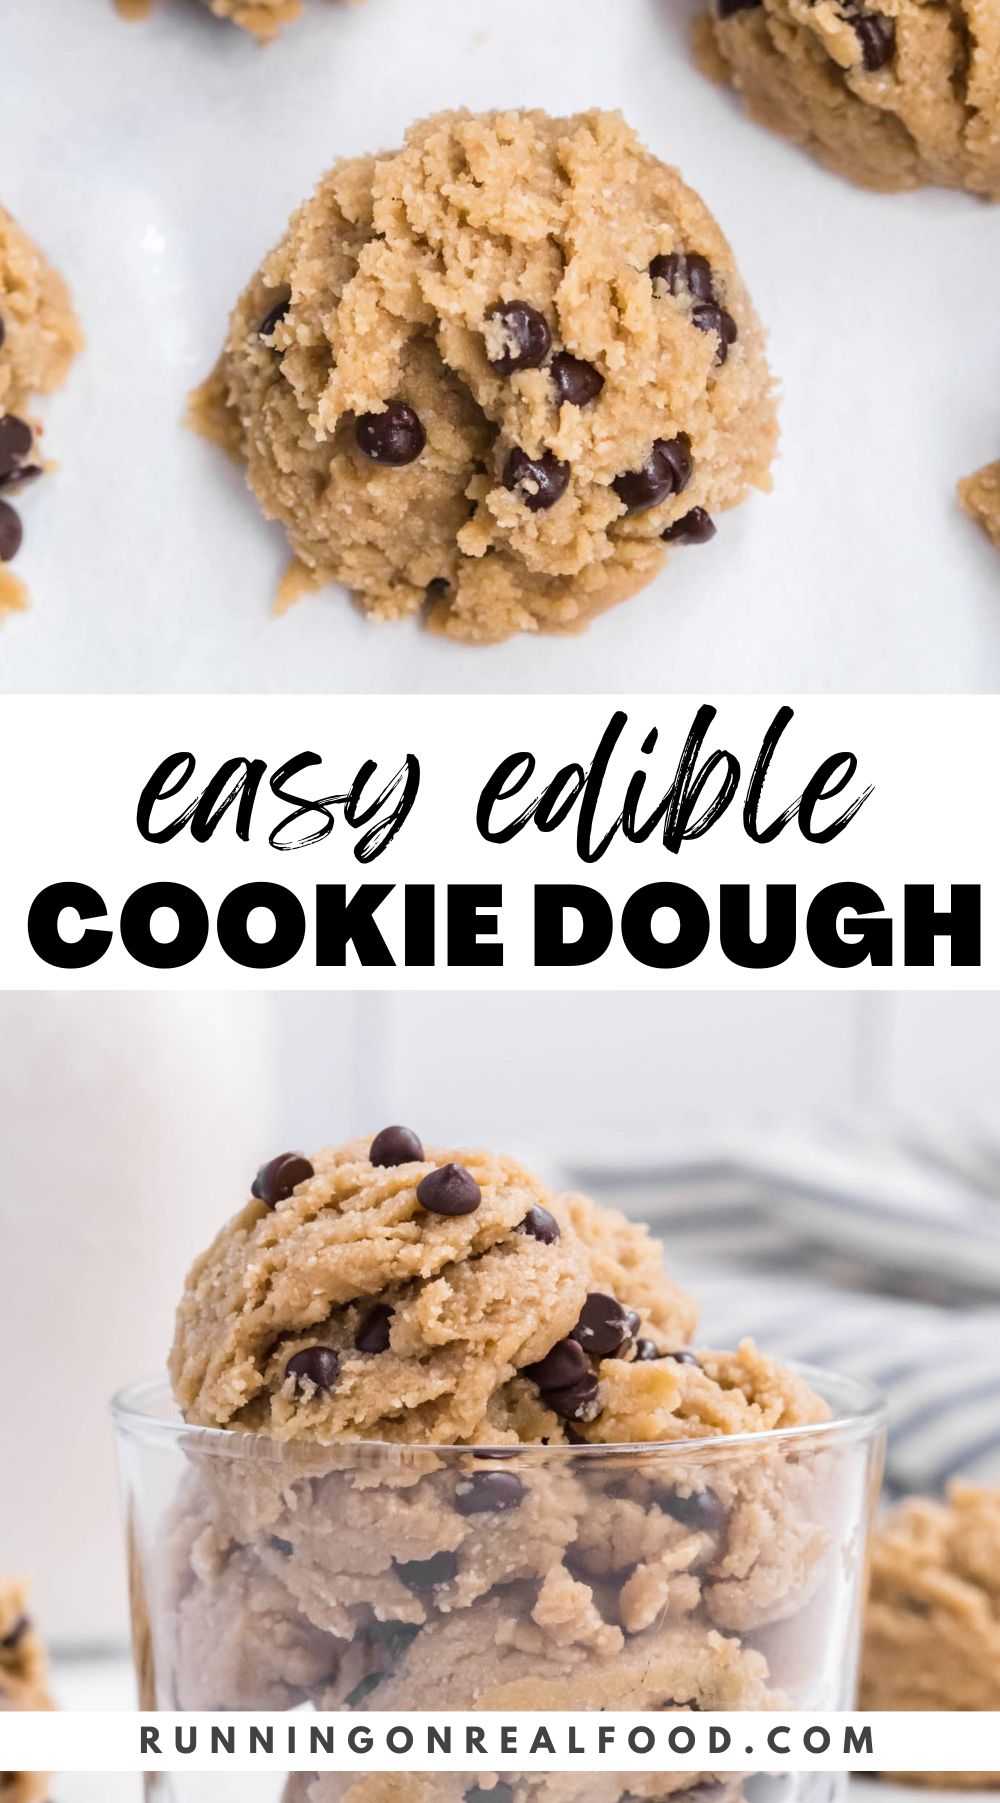 Pinterest graphic for edible cookie dough with two images of the cookie dough and text reading "easy edible cookie dough".